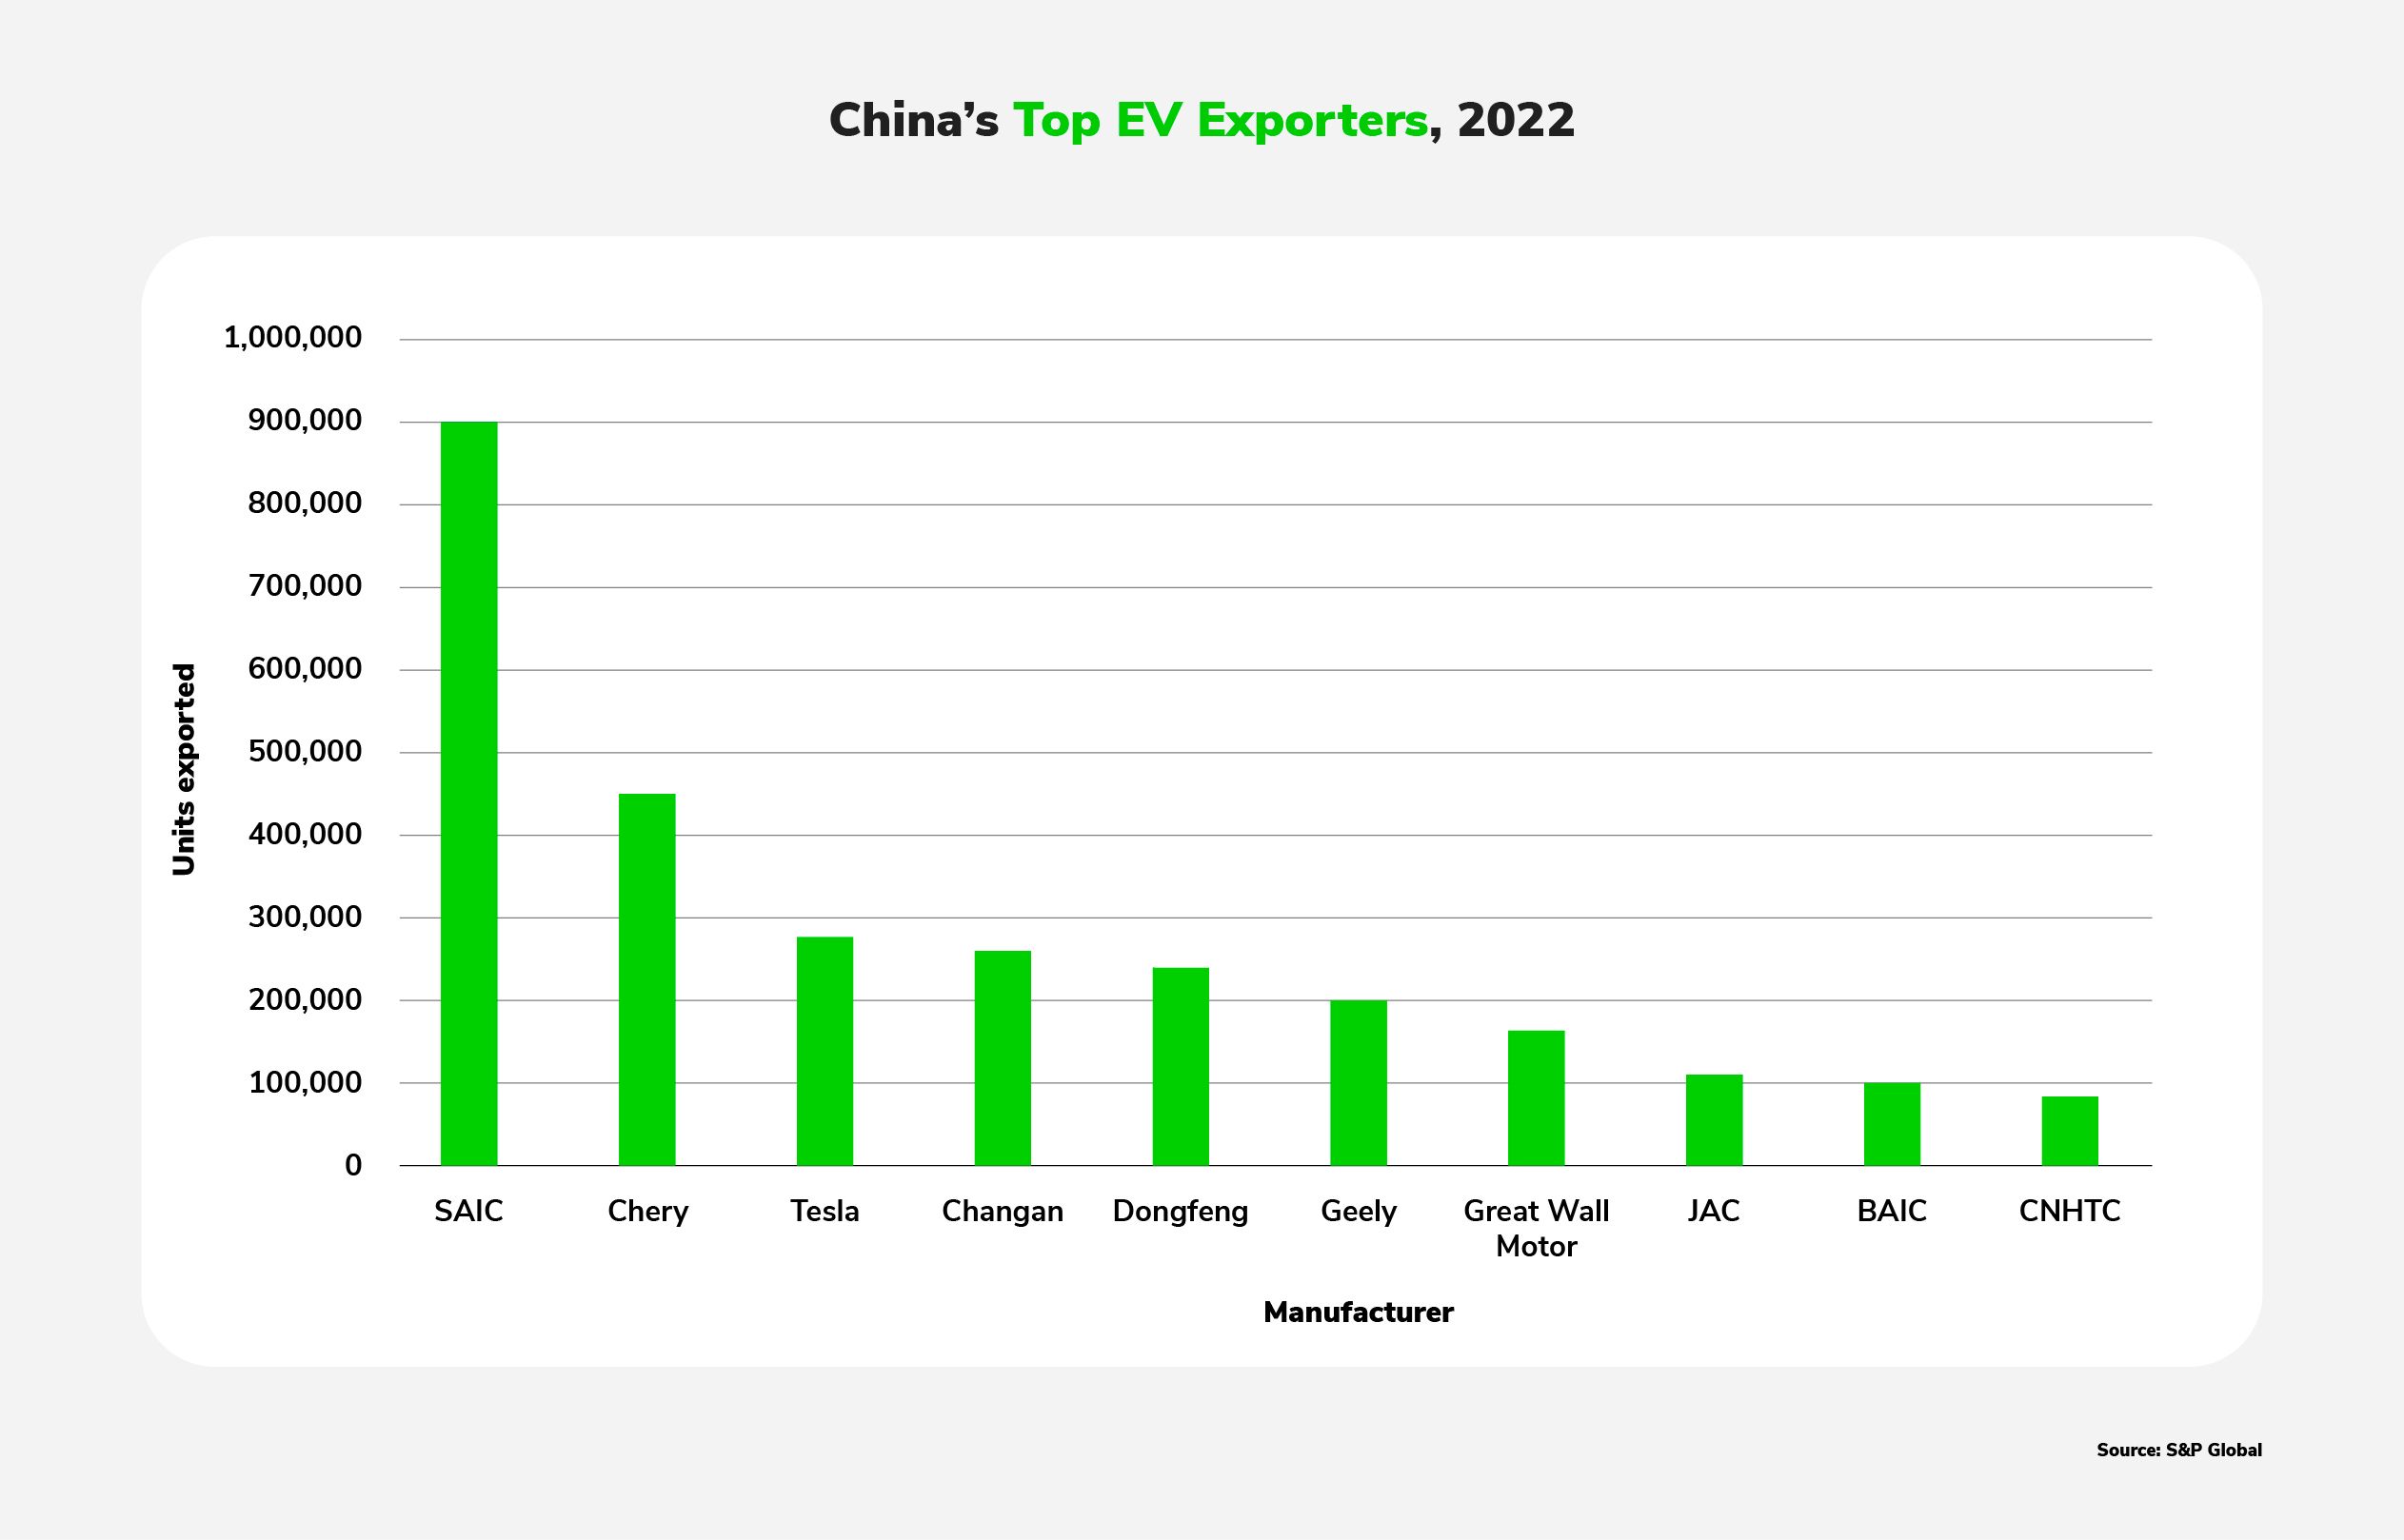 A bar chart showing top-performing Chinese EV exporters in 2022